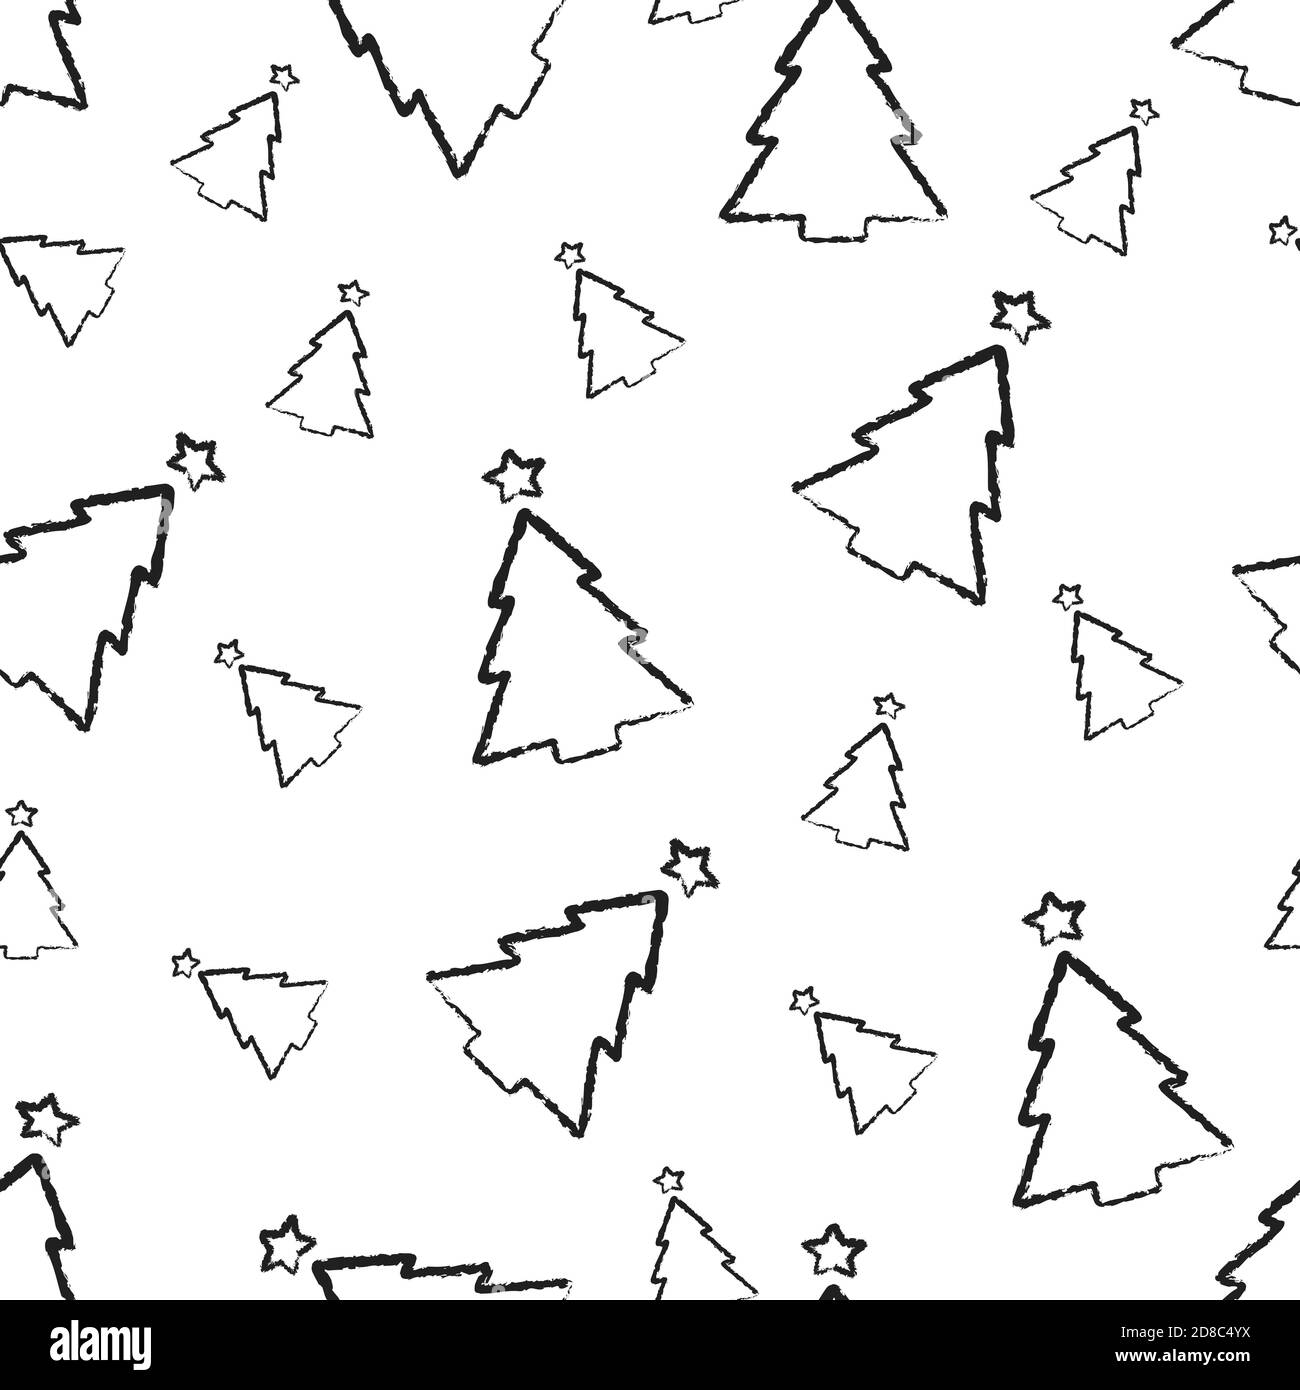 Minimalist Christmas Trees Black on White Wrapping Paper by PerspeKtivz